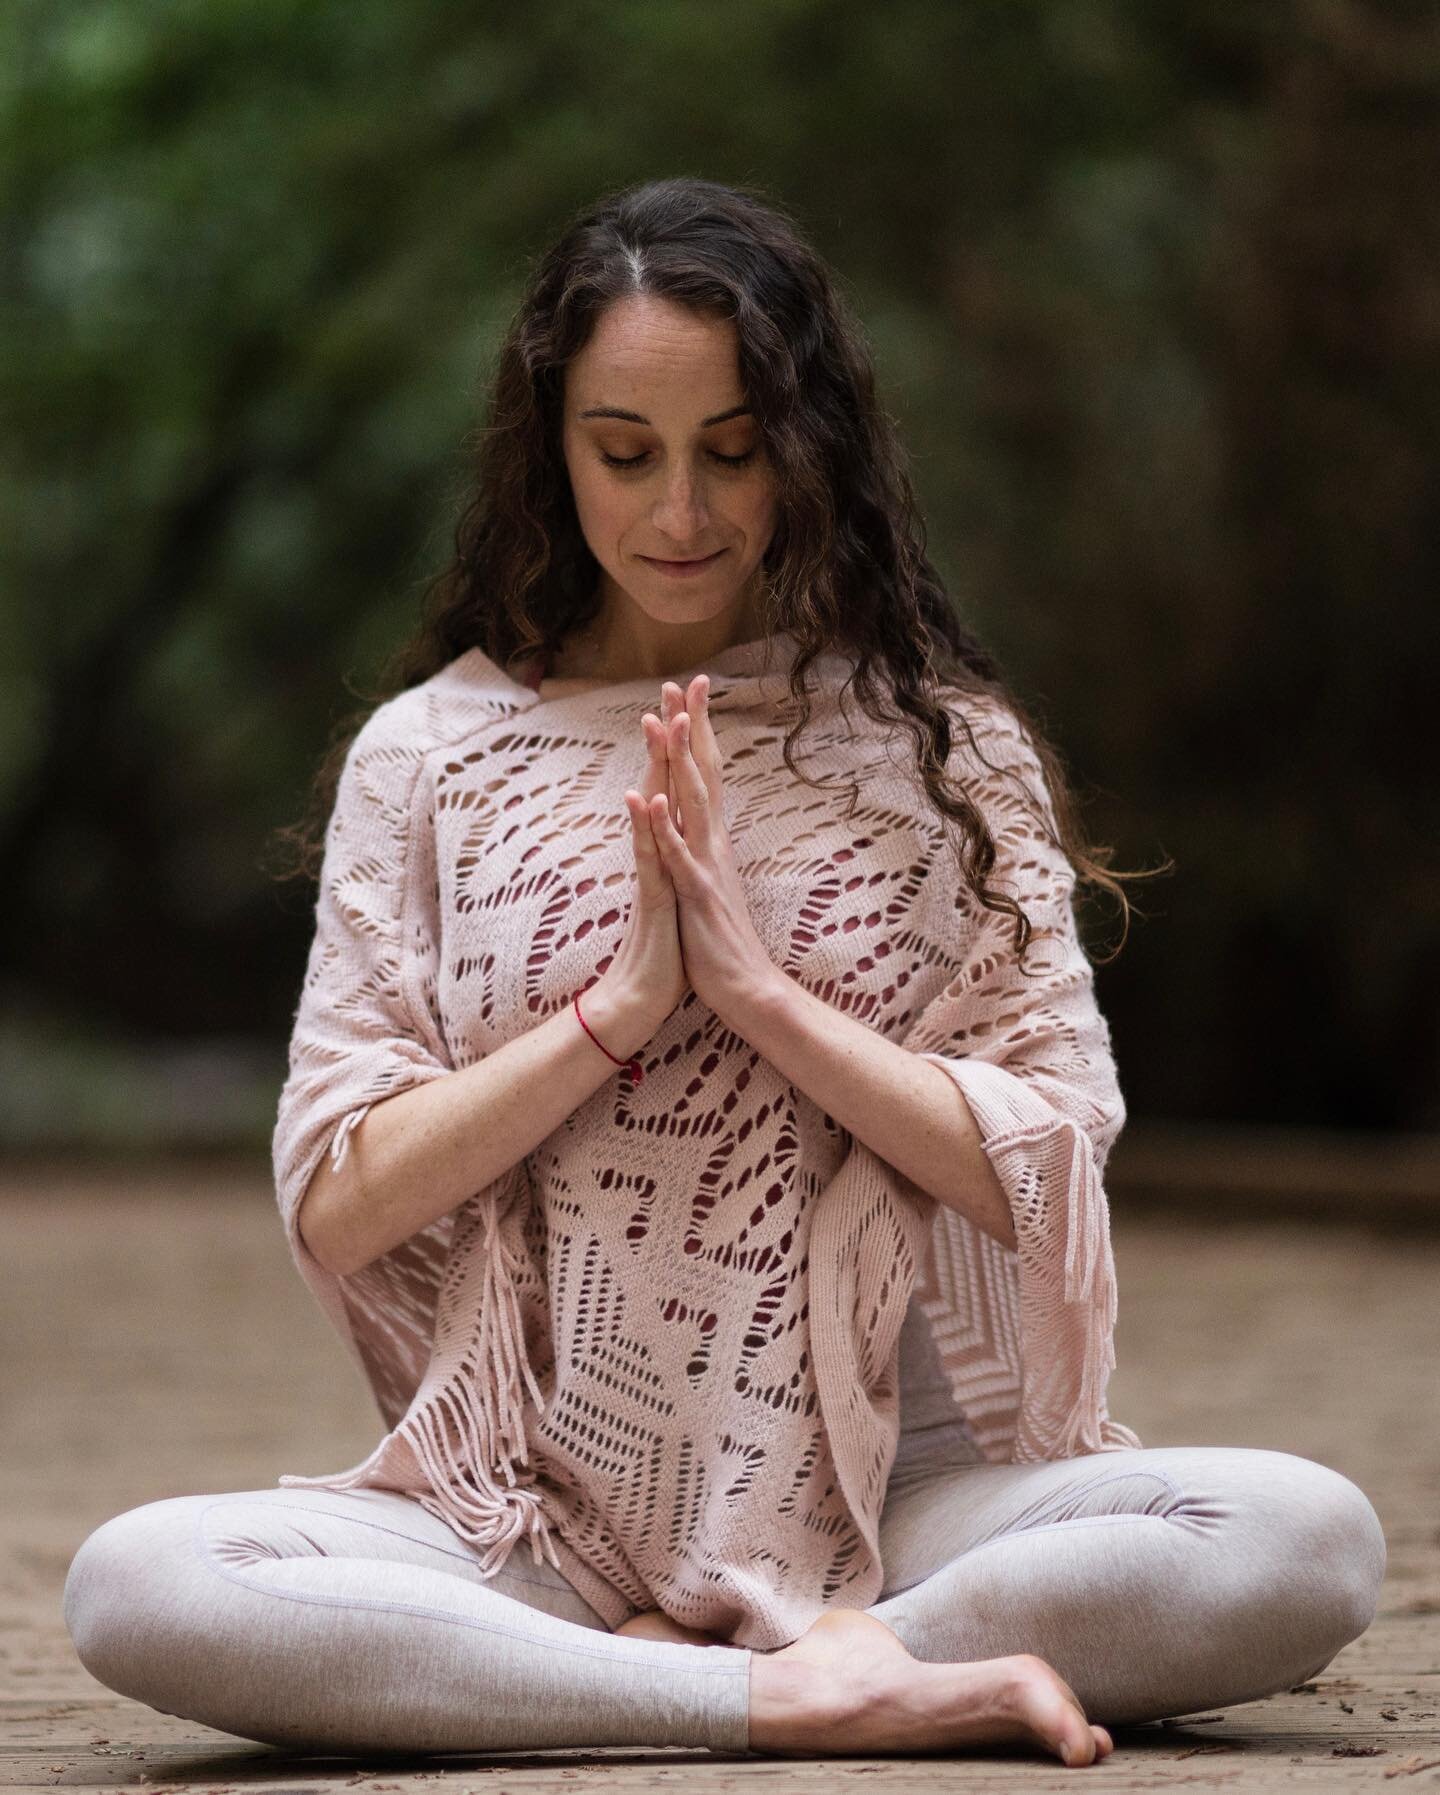 curious to deepen your personal practice? eager to learn more about what it means to live your yoga, off the mat? @laurencohenyoga offers a deep dive into key teachings of yoga philosophy and how they apply to our everyday lives. this workshop includ